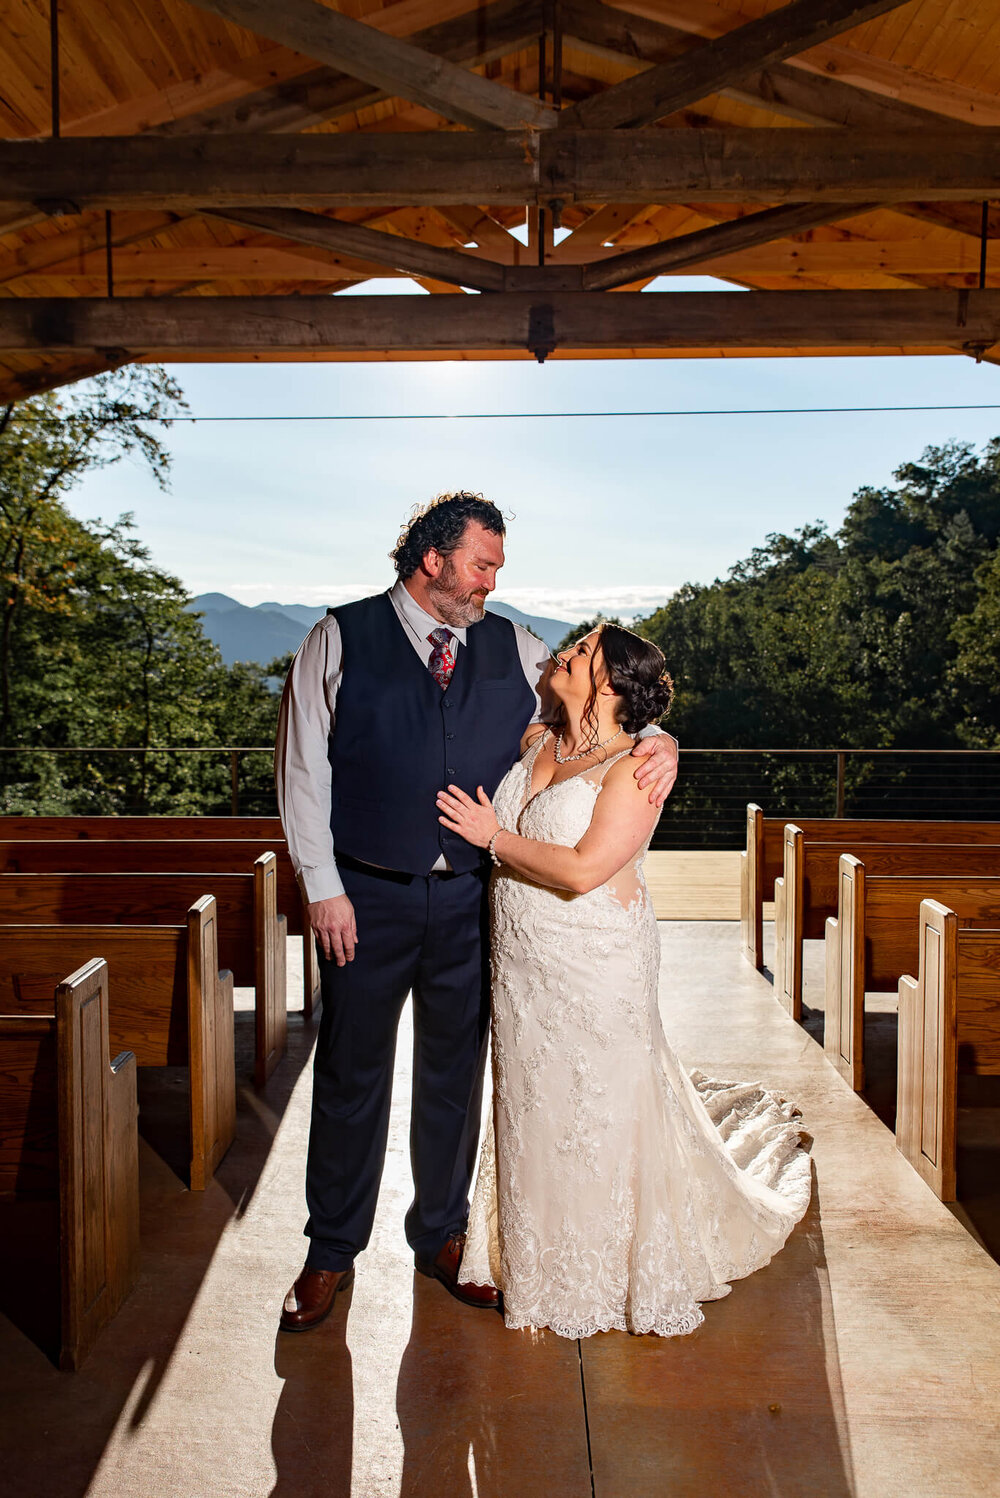 Bride and Groom looking at each other under wedding ceremony pavilion in the mountains at The Parker Mill